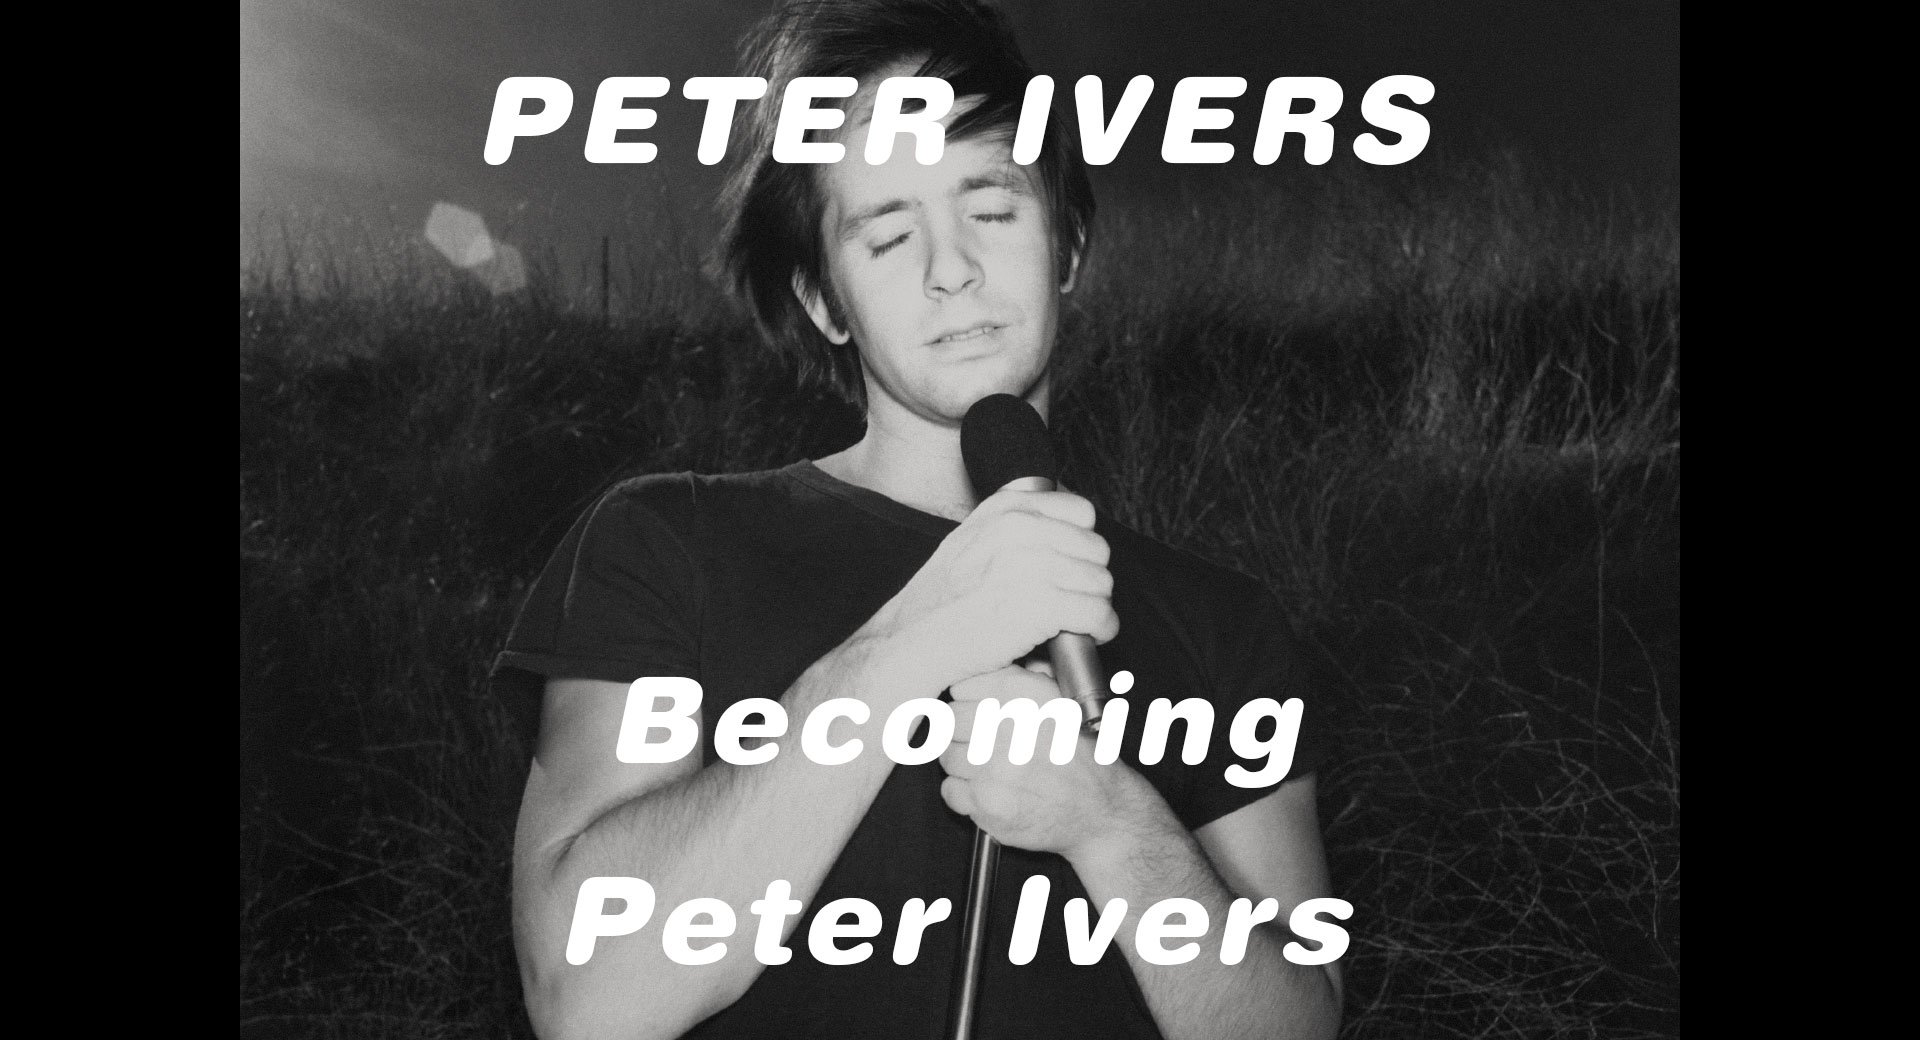 Link to Video for Peter Ivers – Becoming Peter Ivers